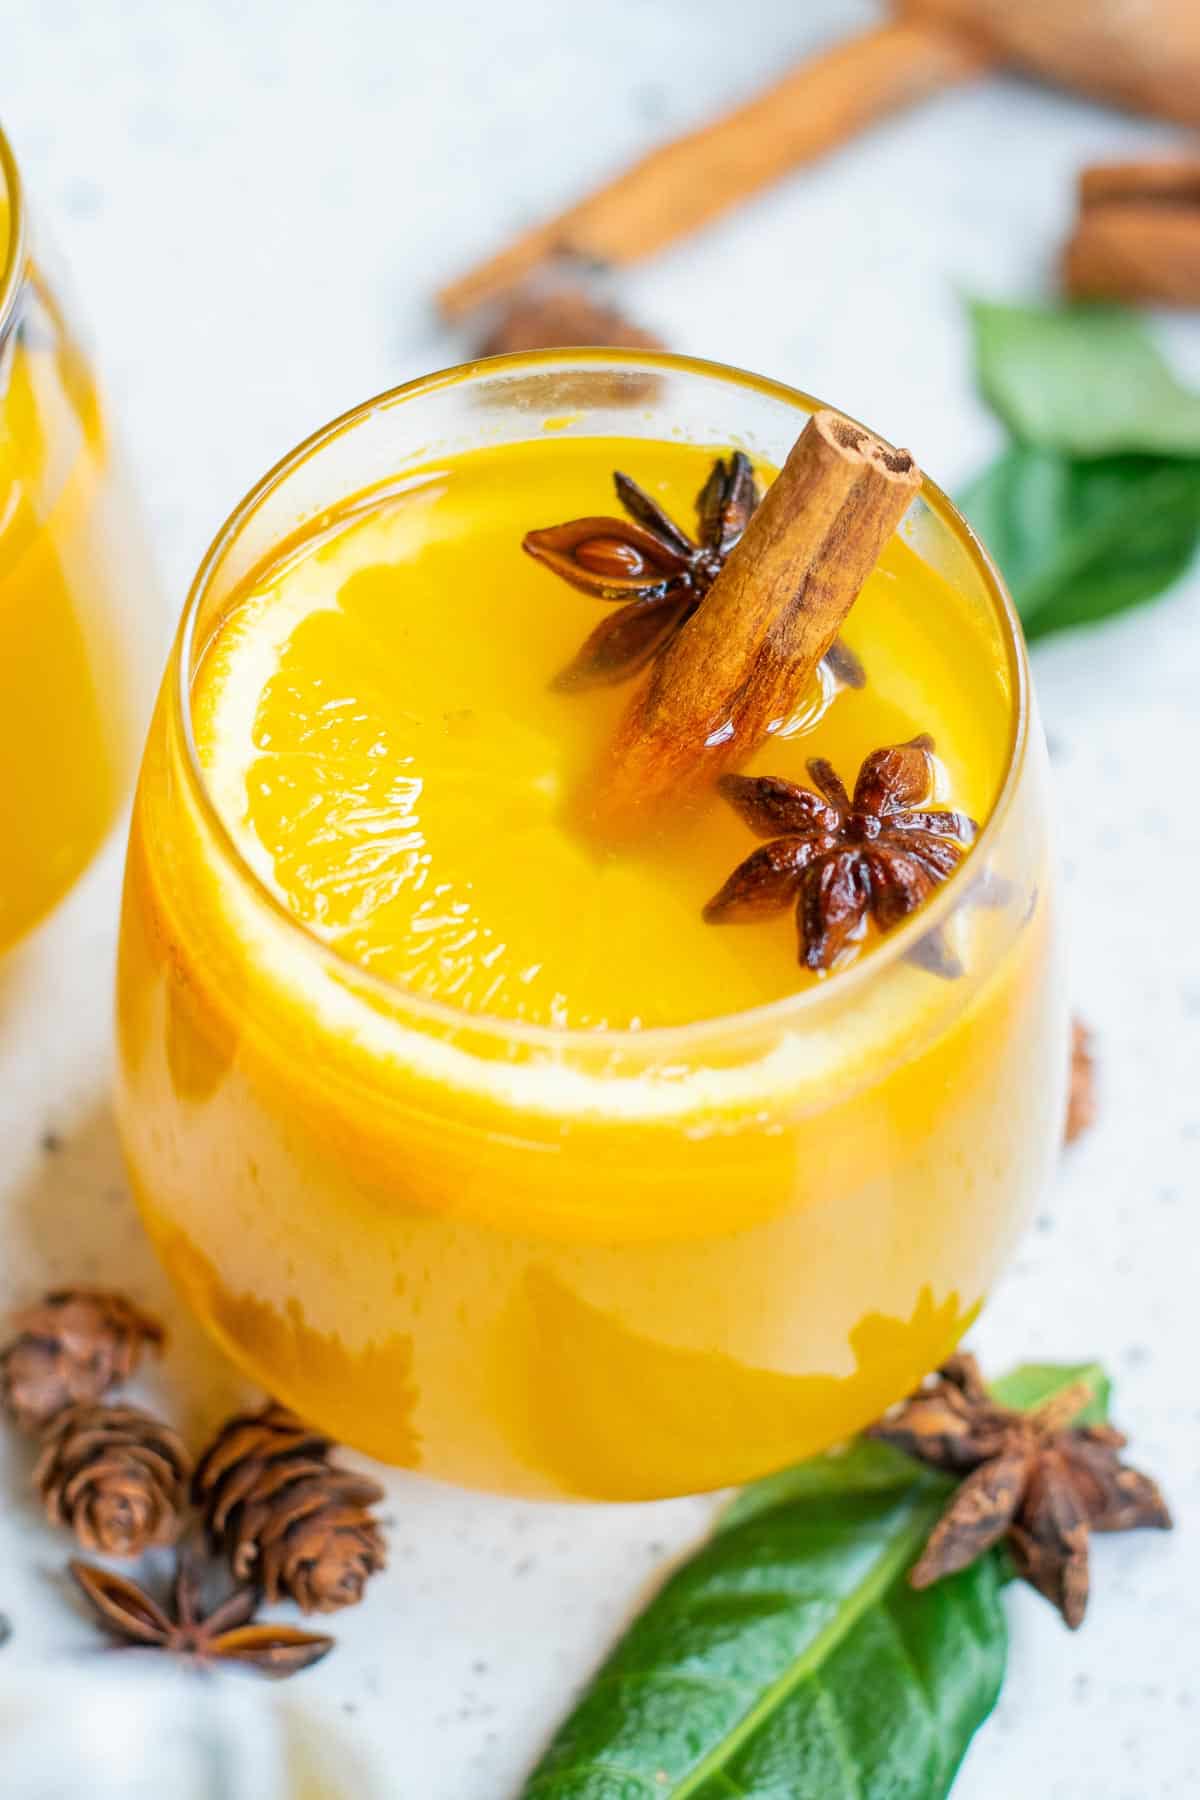 Orange punch in a wine glass with whole star anise and cinnamon sticks.